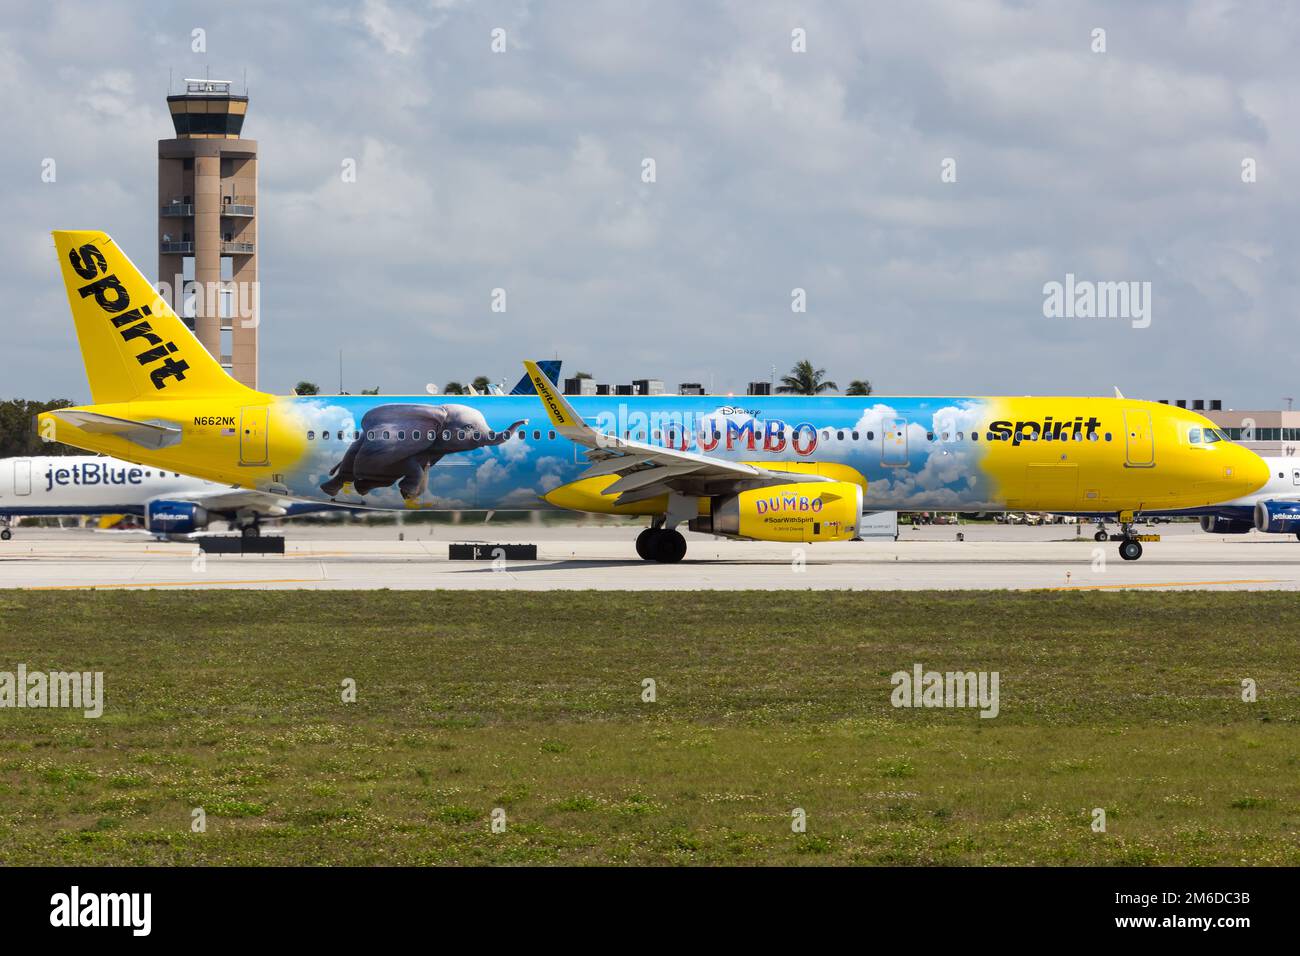 Spirit Airlines Airbus A321 airplane Fort Lauderdale airport special livery Dumbo Stock Photo